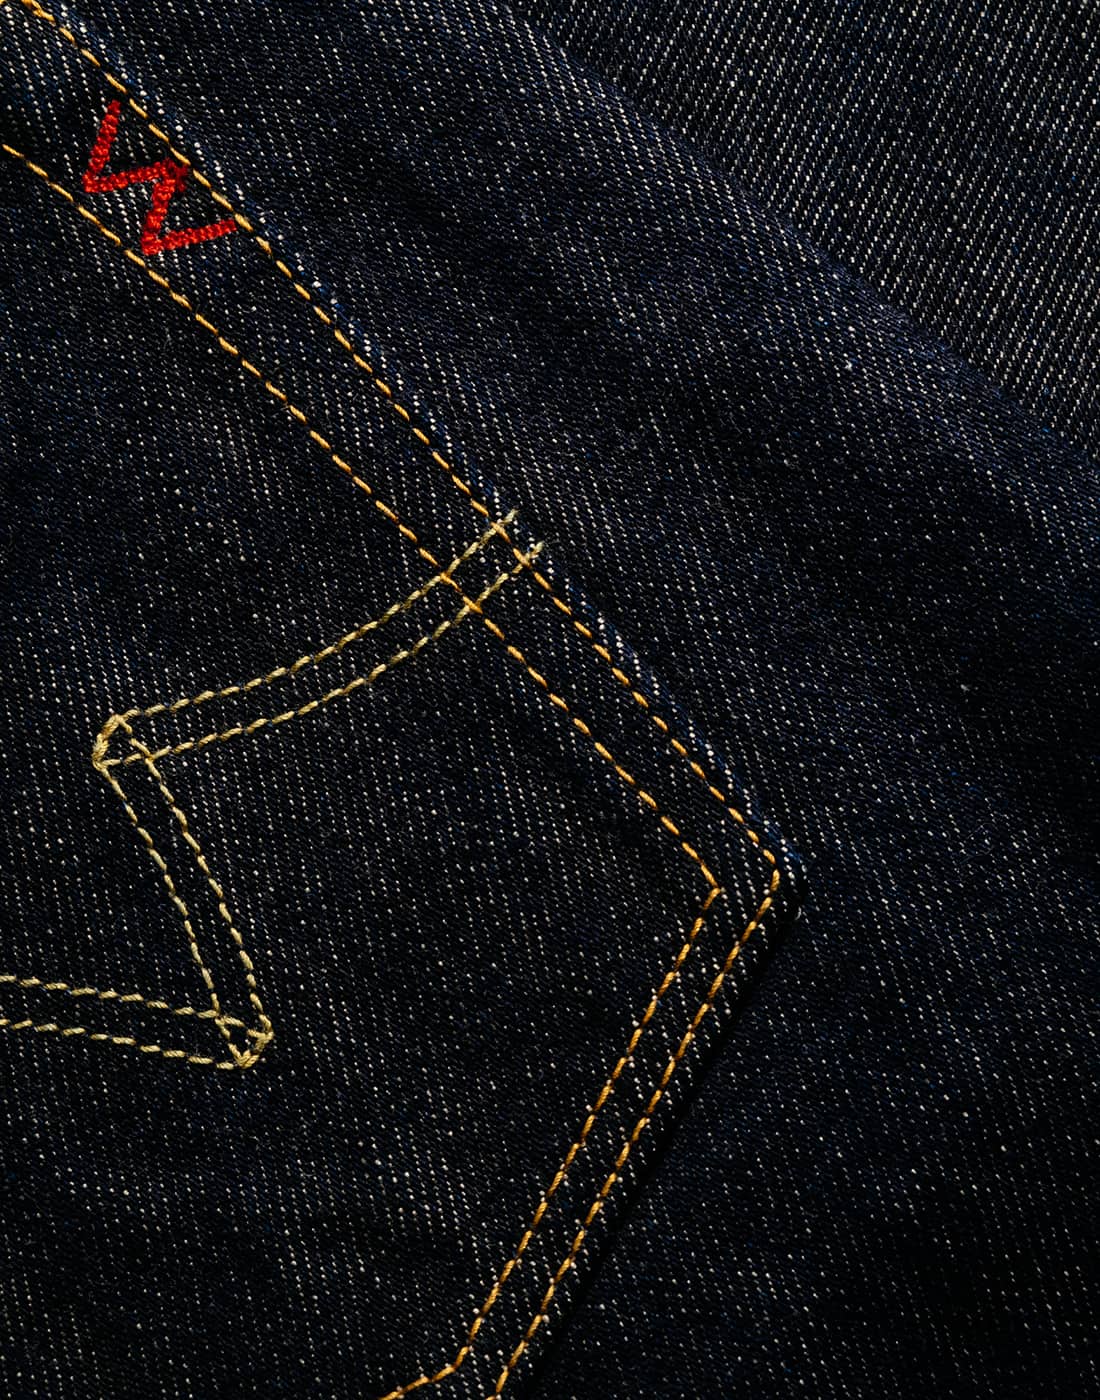 Closeup of the Iron Heart brand icon sewn on a back pocket